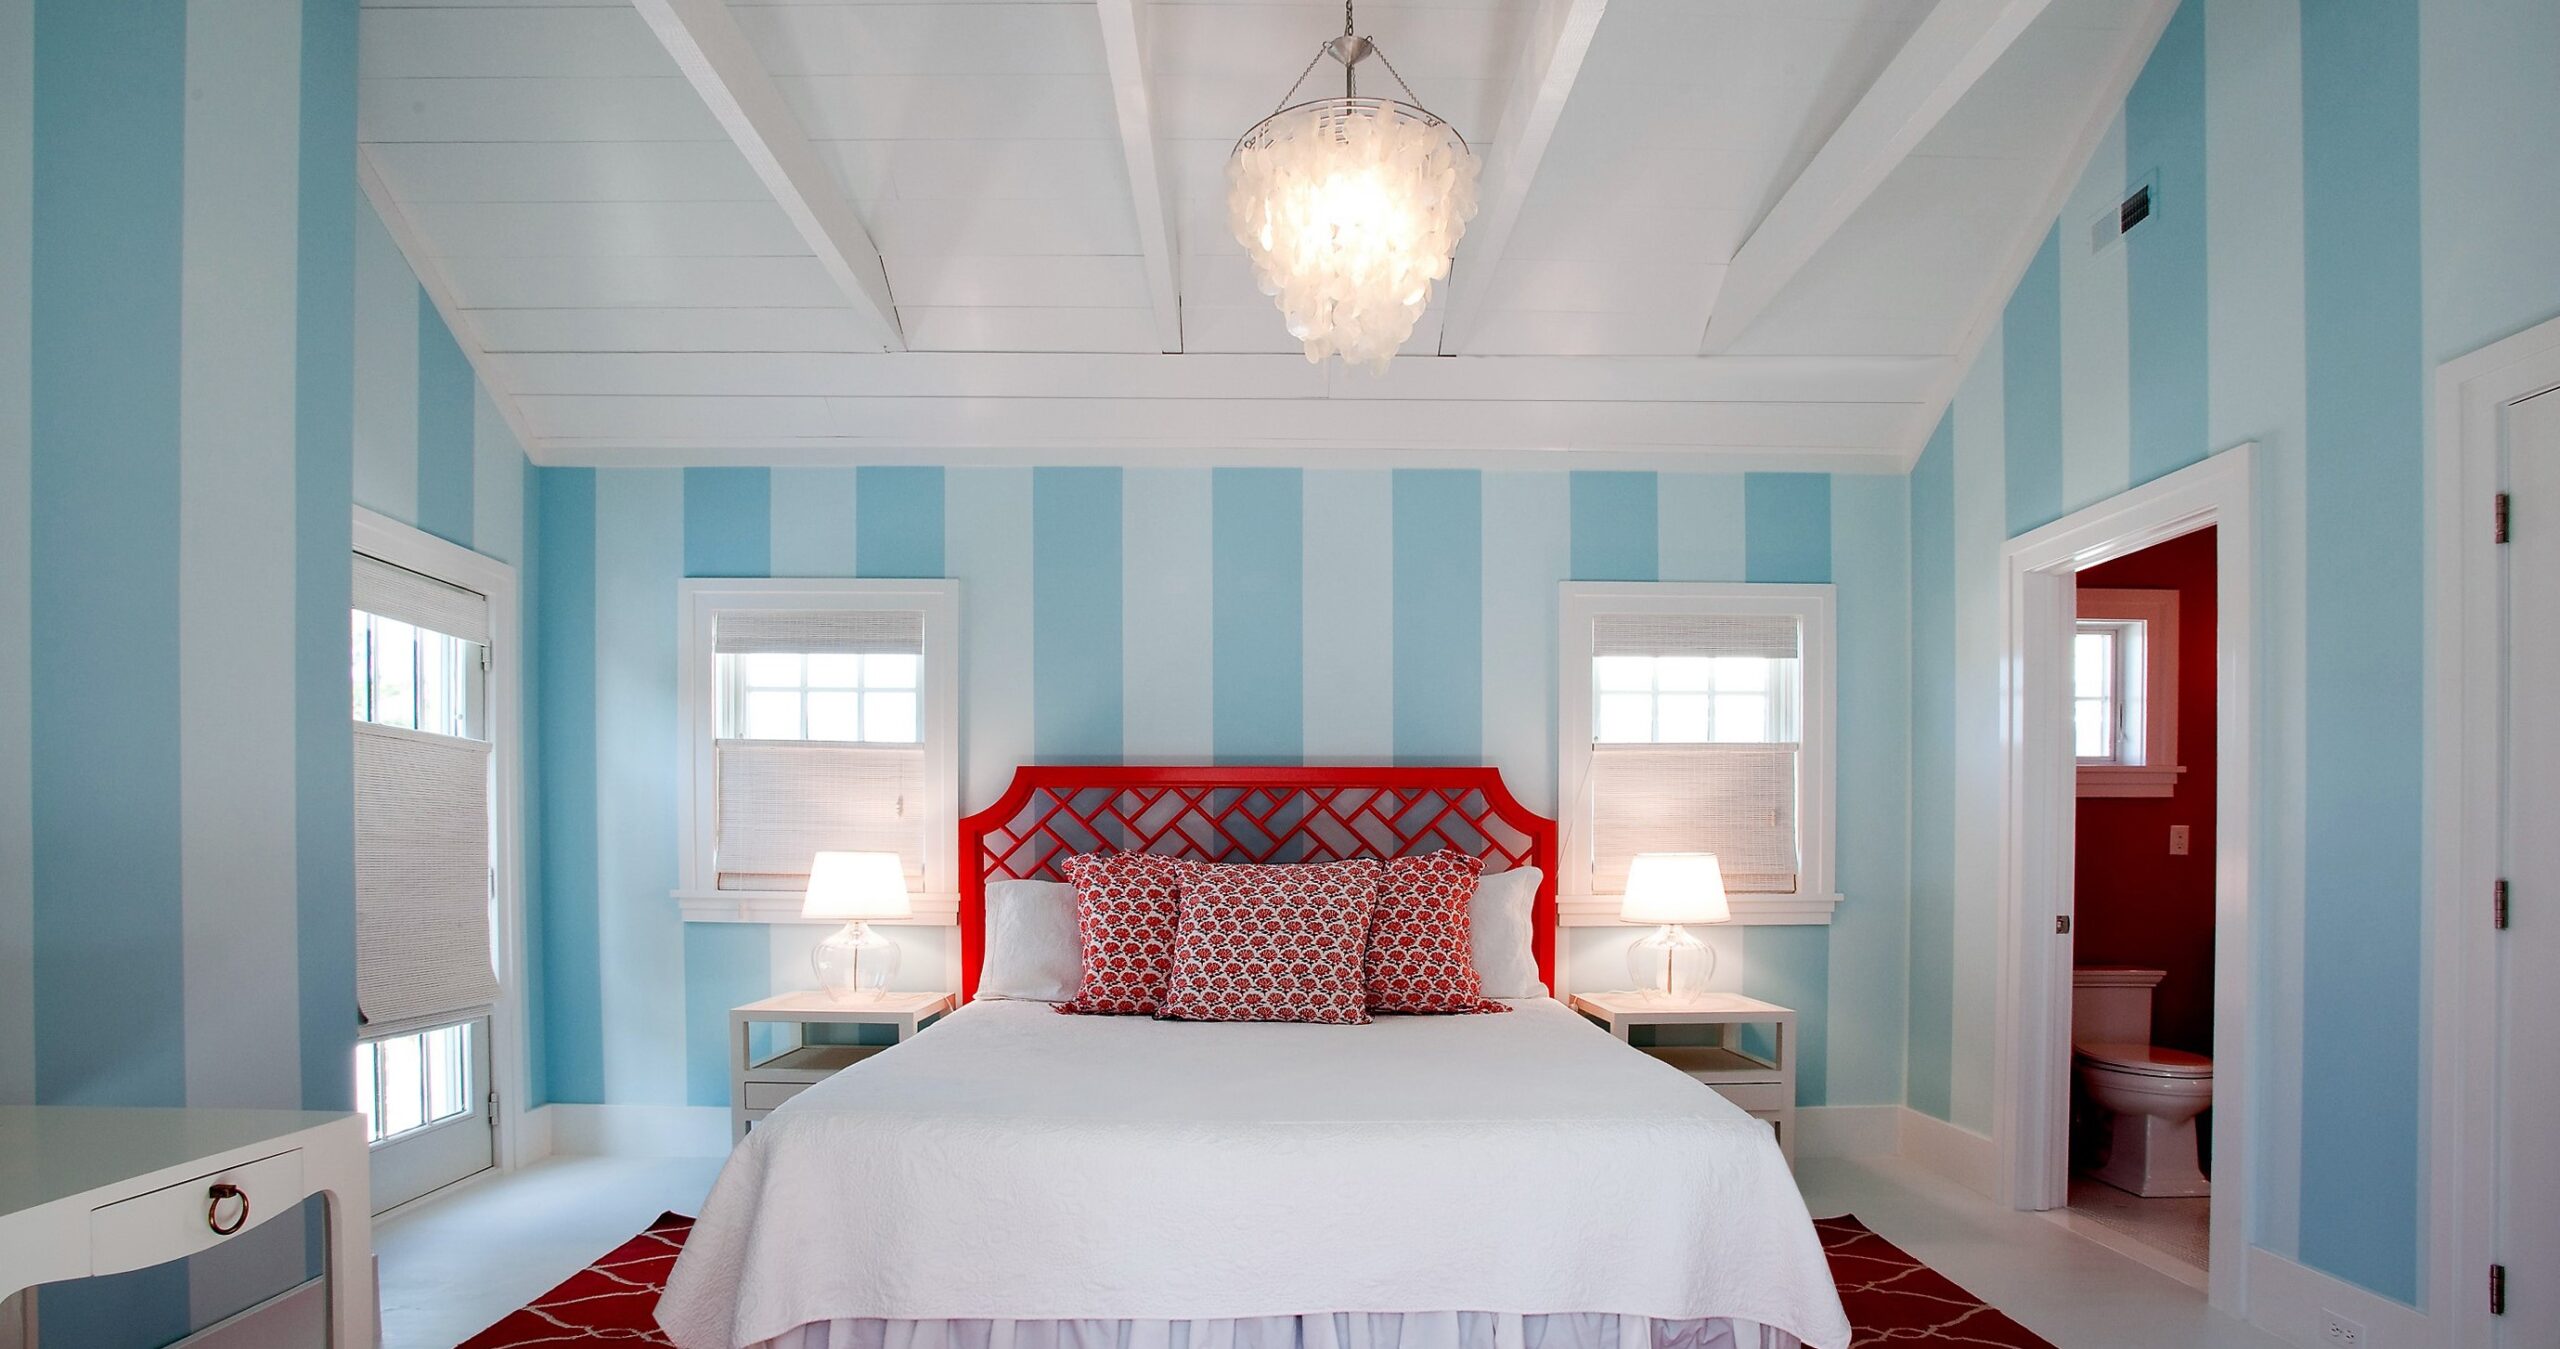 Counterpoint_Red-Bed_16-9_fixed-tight-crop